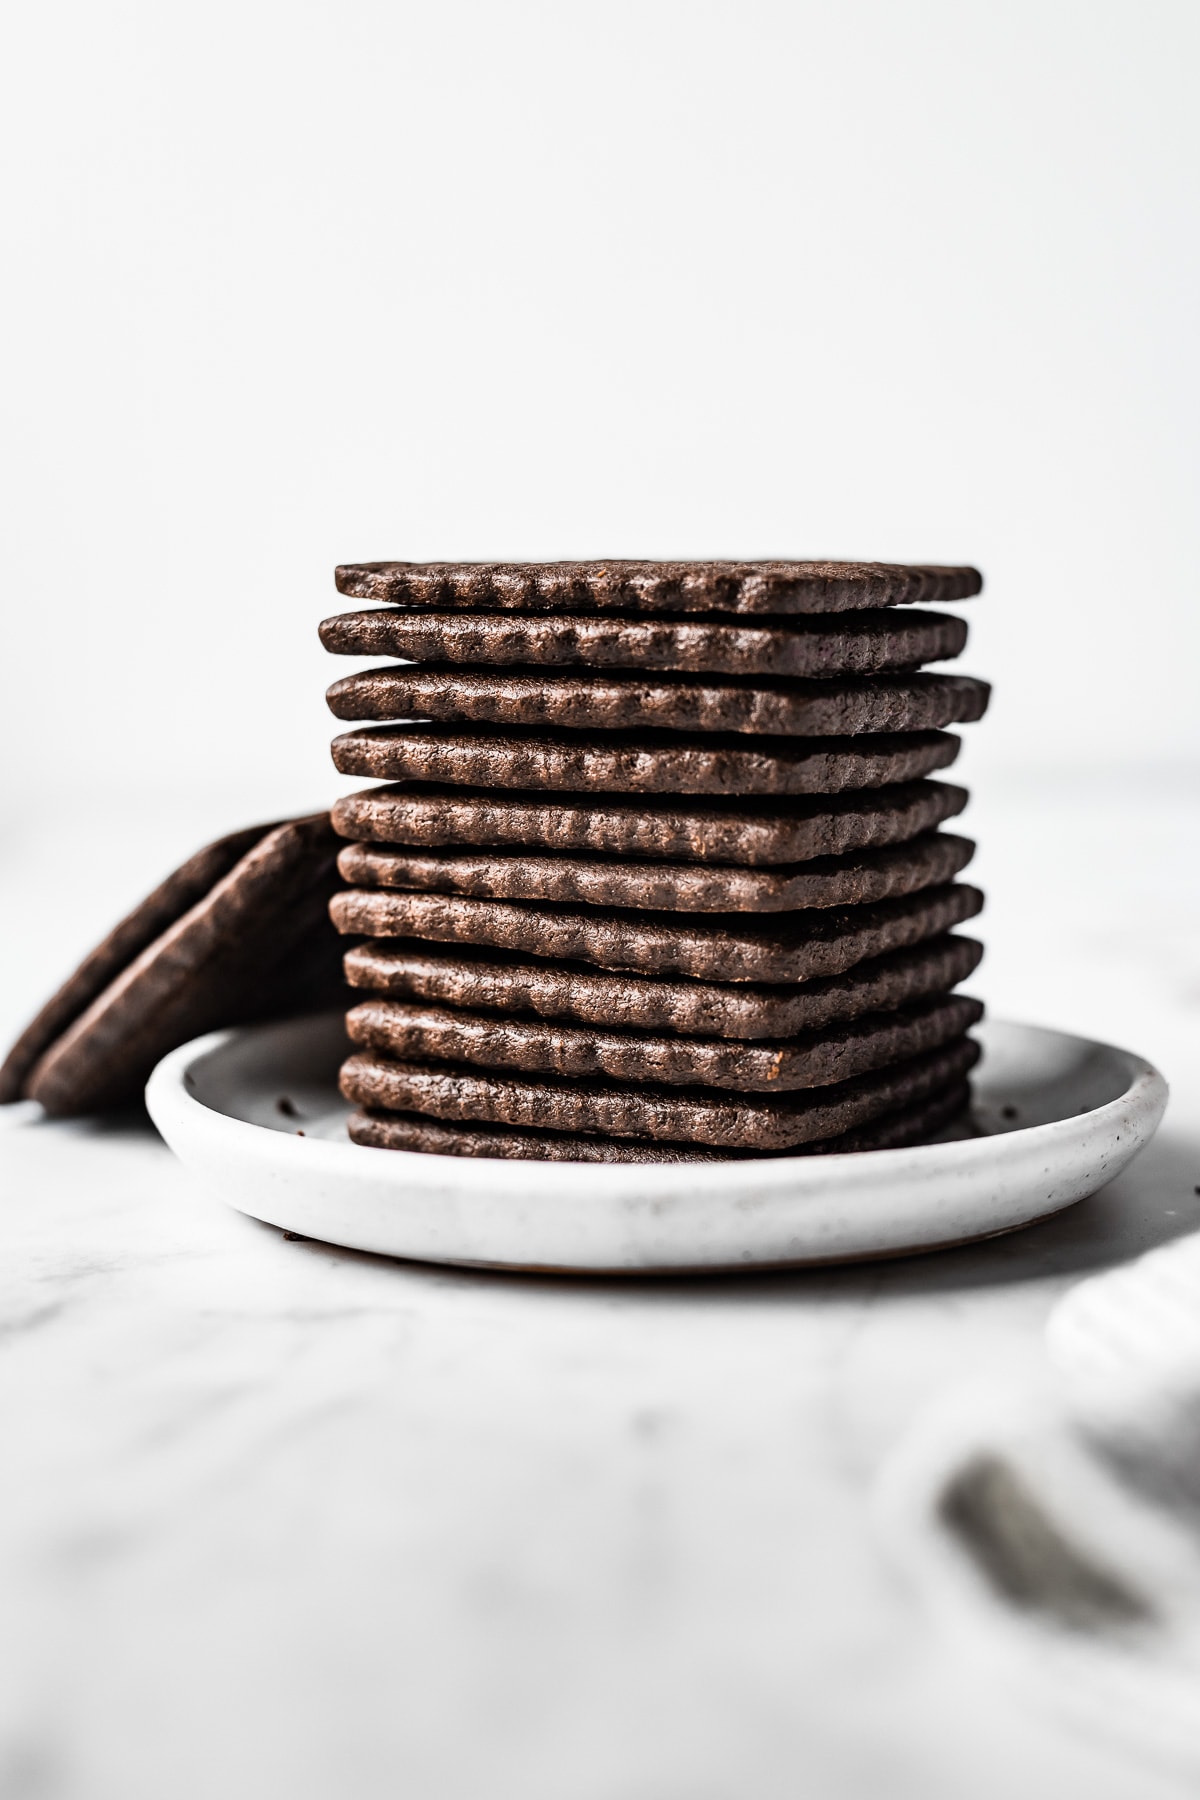 A stack of square chocolate cookies with scalloped edge on a small white ceramic plate on a light grey marble surface. Two additional cookies on the left lean against the stack.